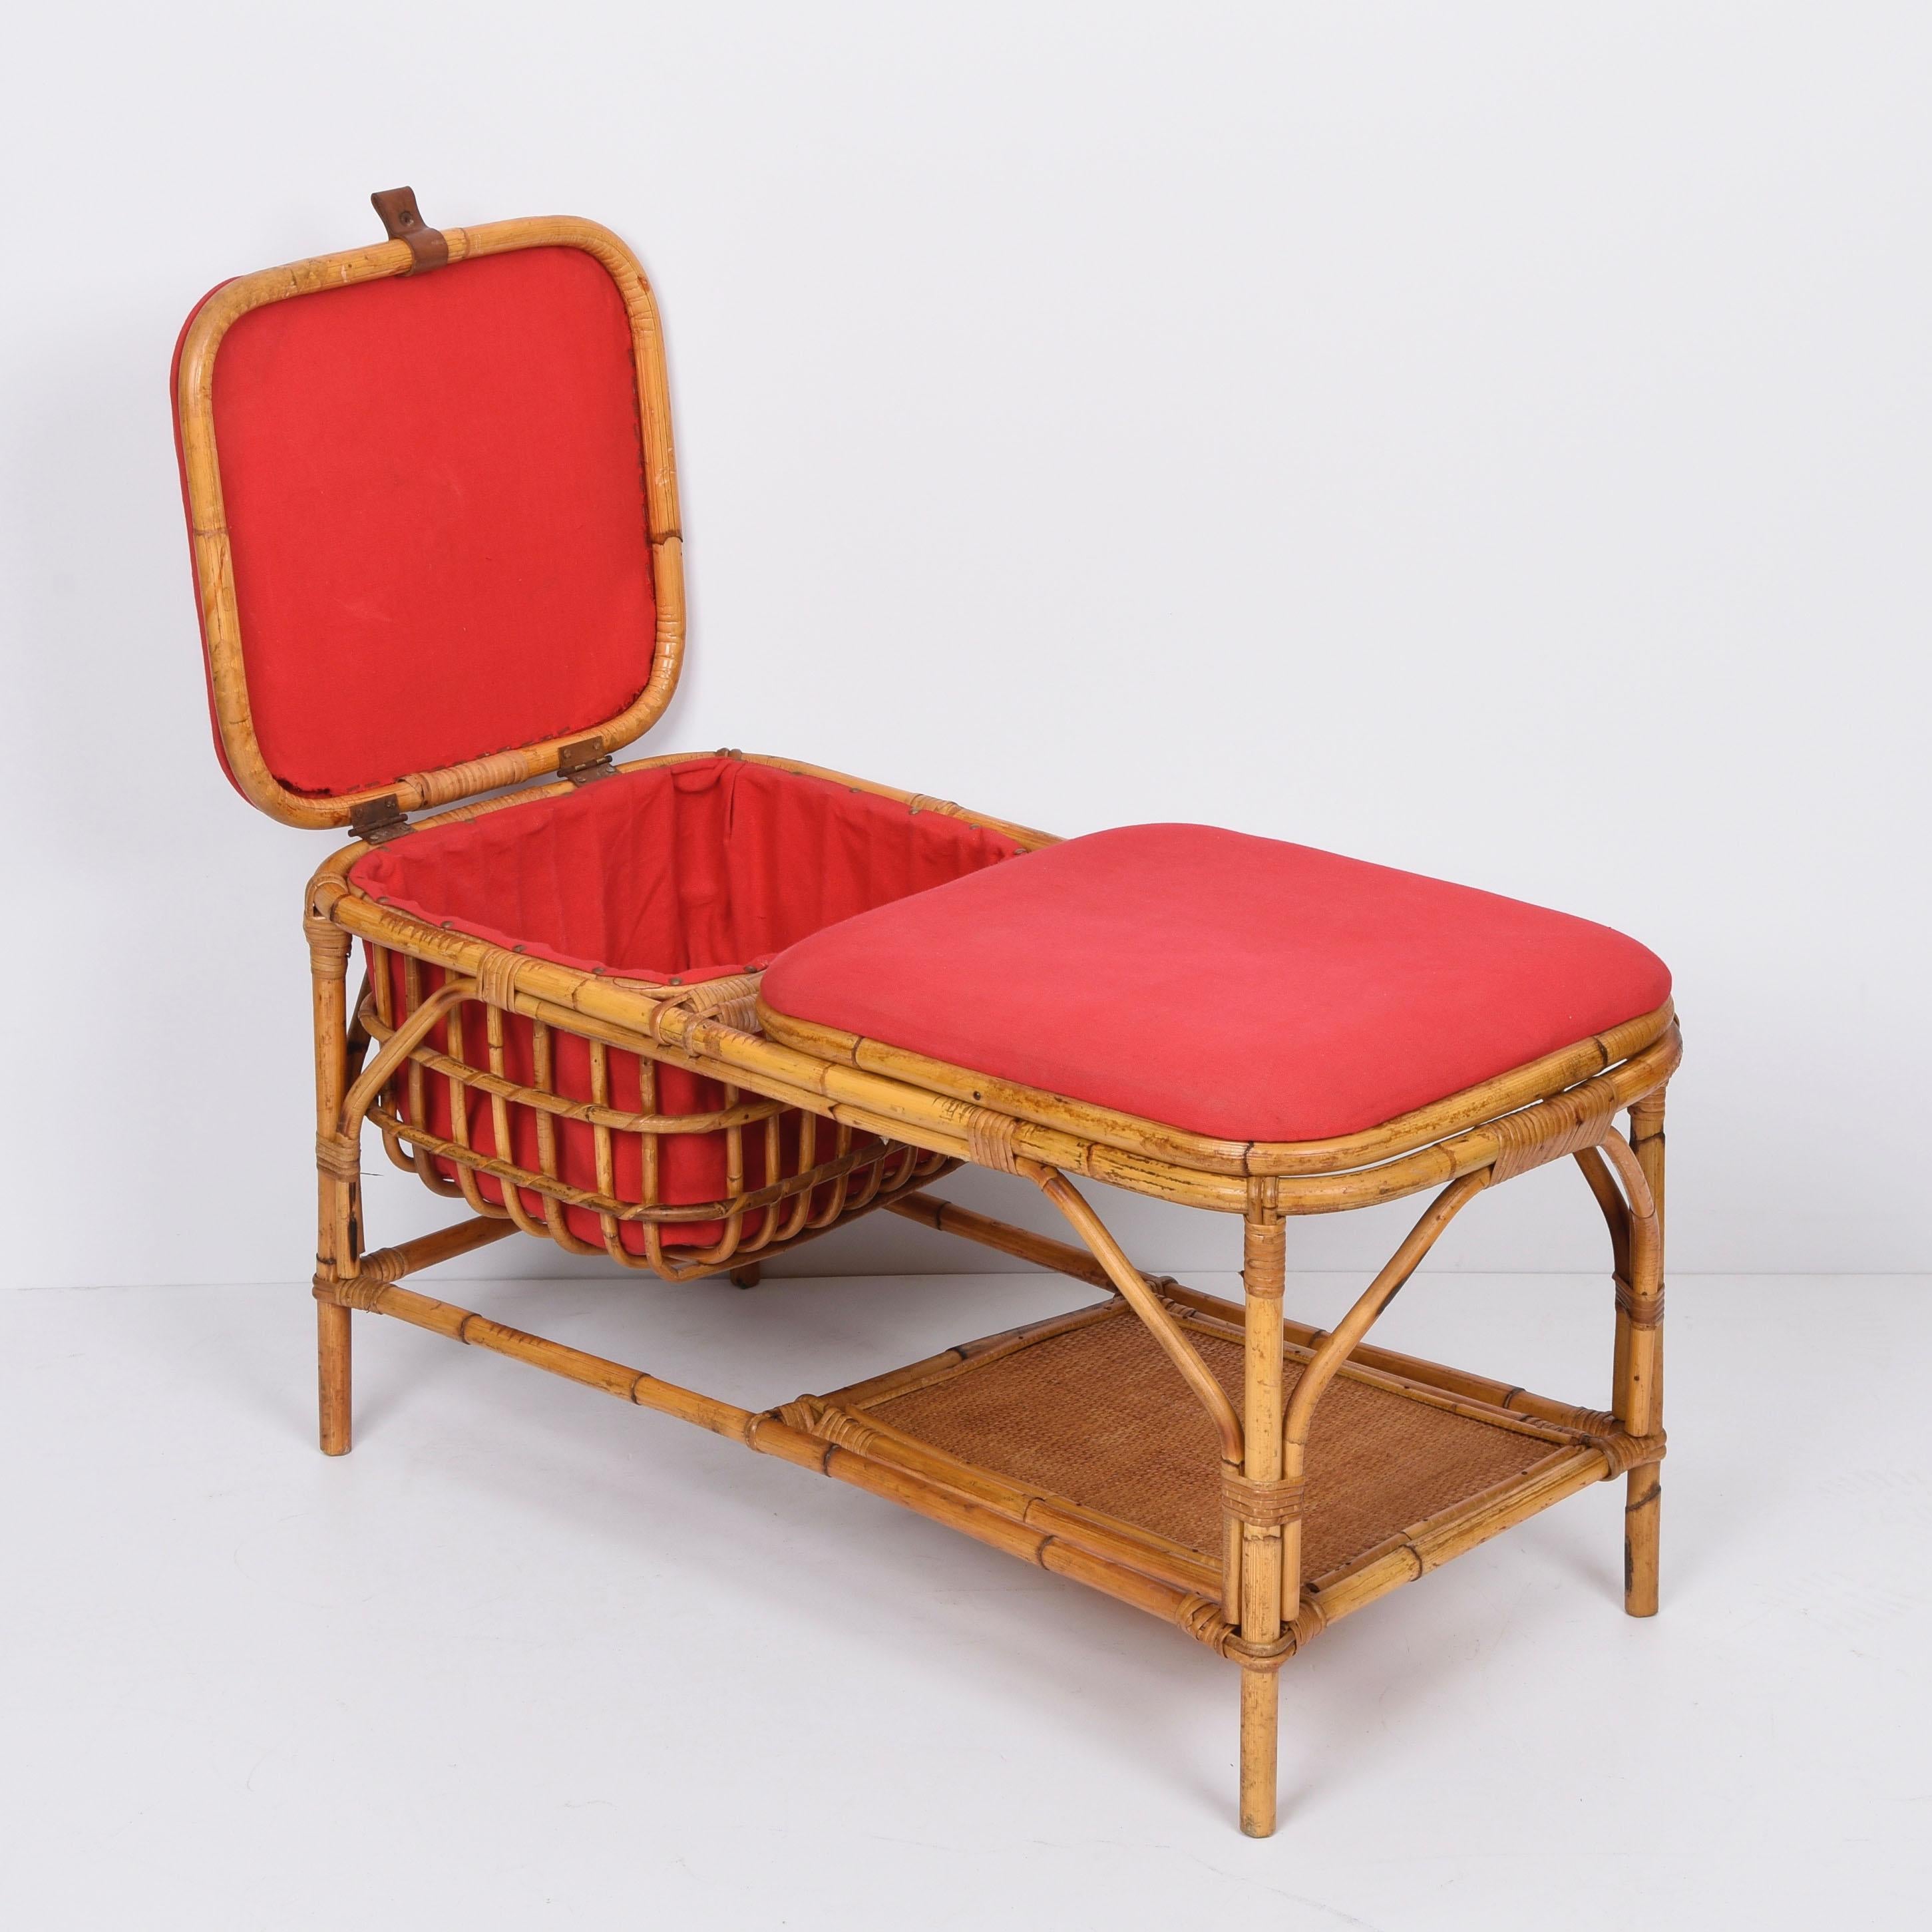 Midcentury Bamboo and Rattan Italian Bench with Box Case, 1950s For Sale 3